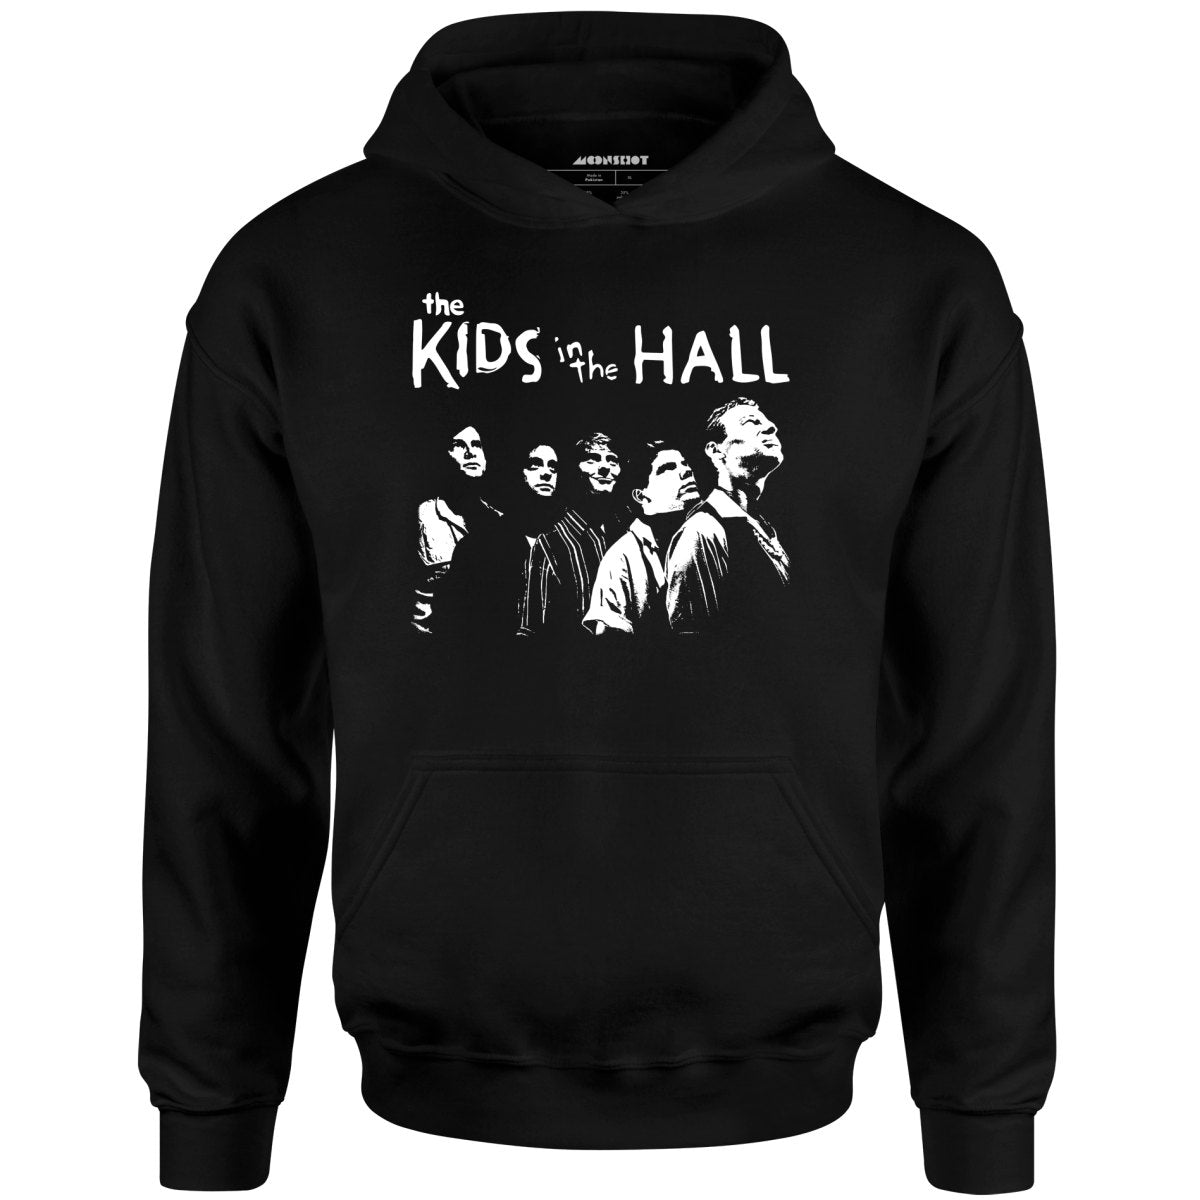 The Kids in The Hall - Unisex Hoodie